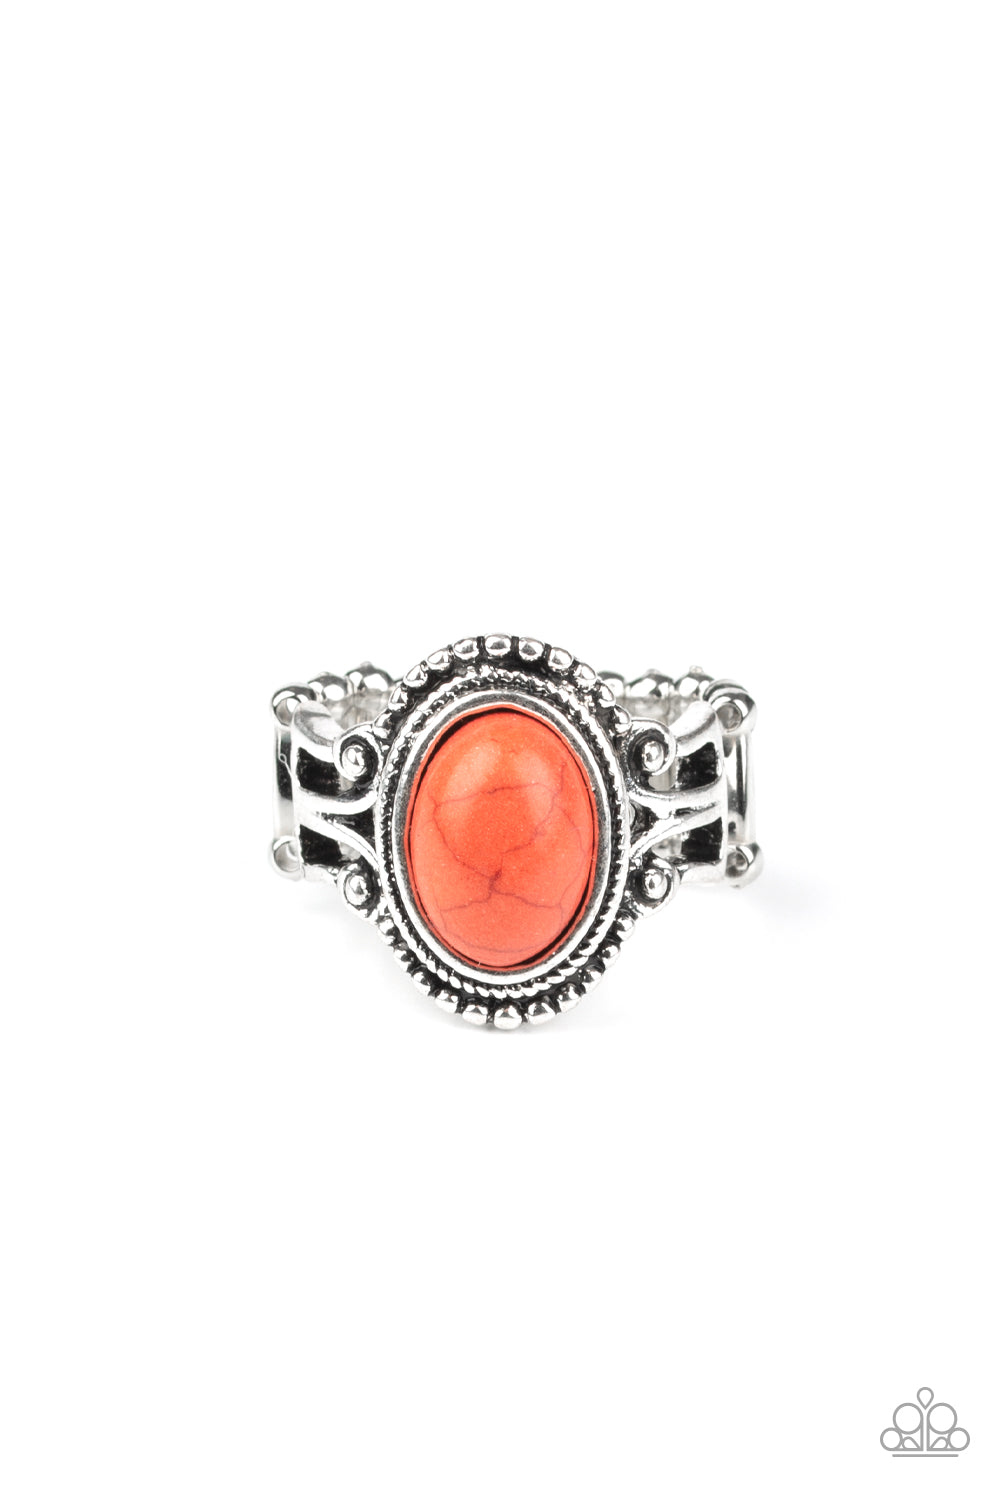 Paparazzi Rings ~ All The Worlds A STAGECOACH - Orange